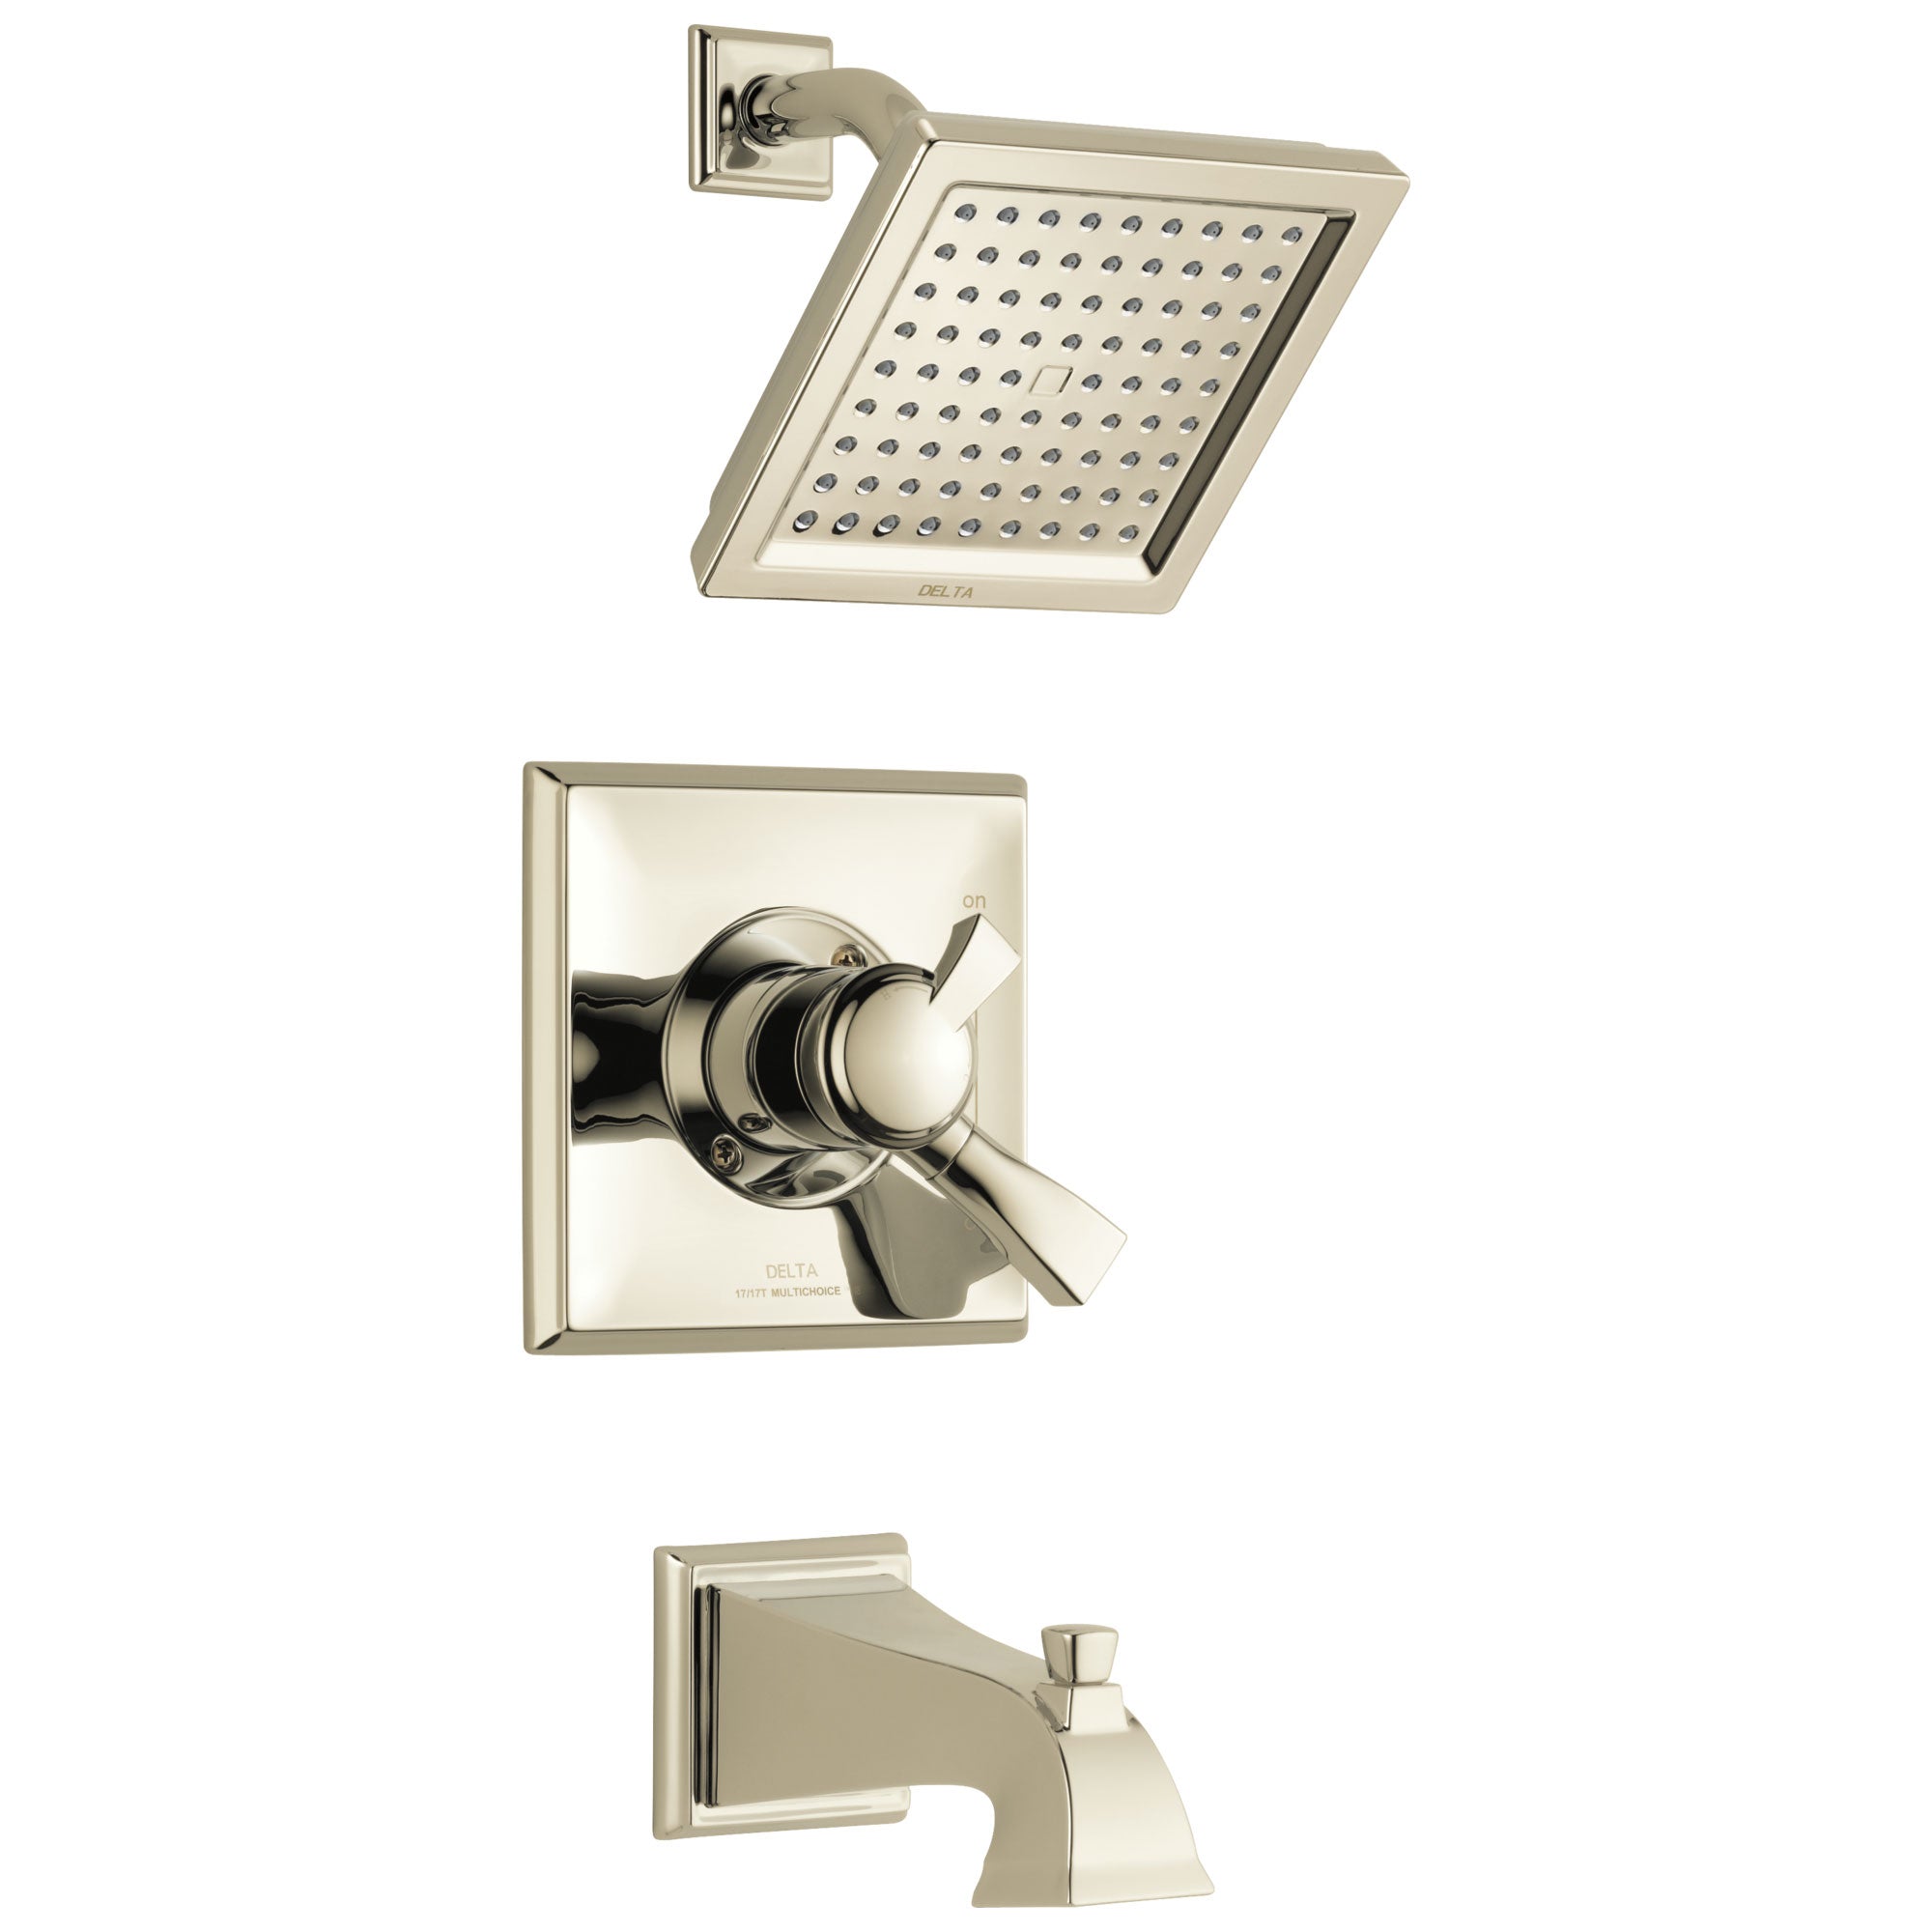 Delta Dryden Polished Nickel Finish Monitor 17 Series Water Efficient Tub & Shower Combo Faucet Trim Kit (Requires Valve) DT17451PNWE